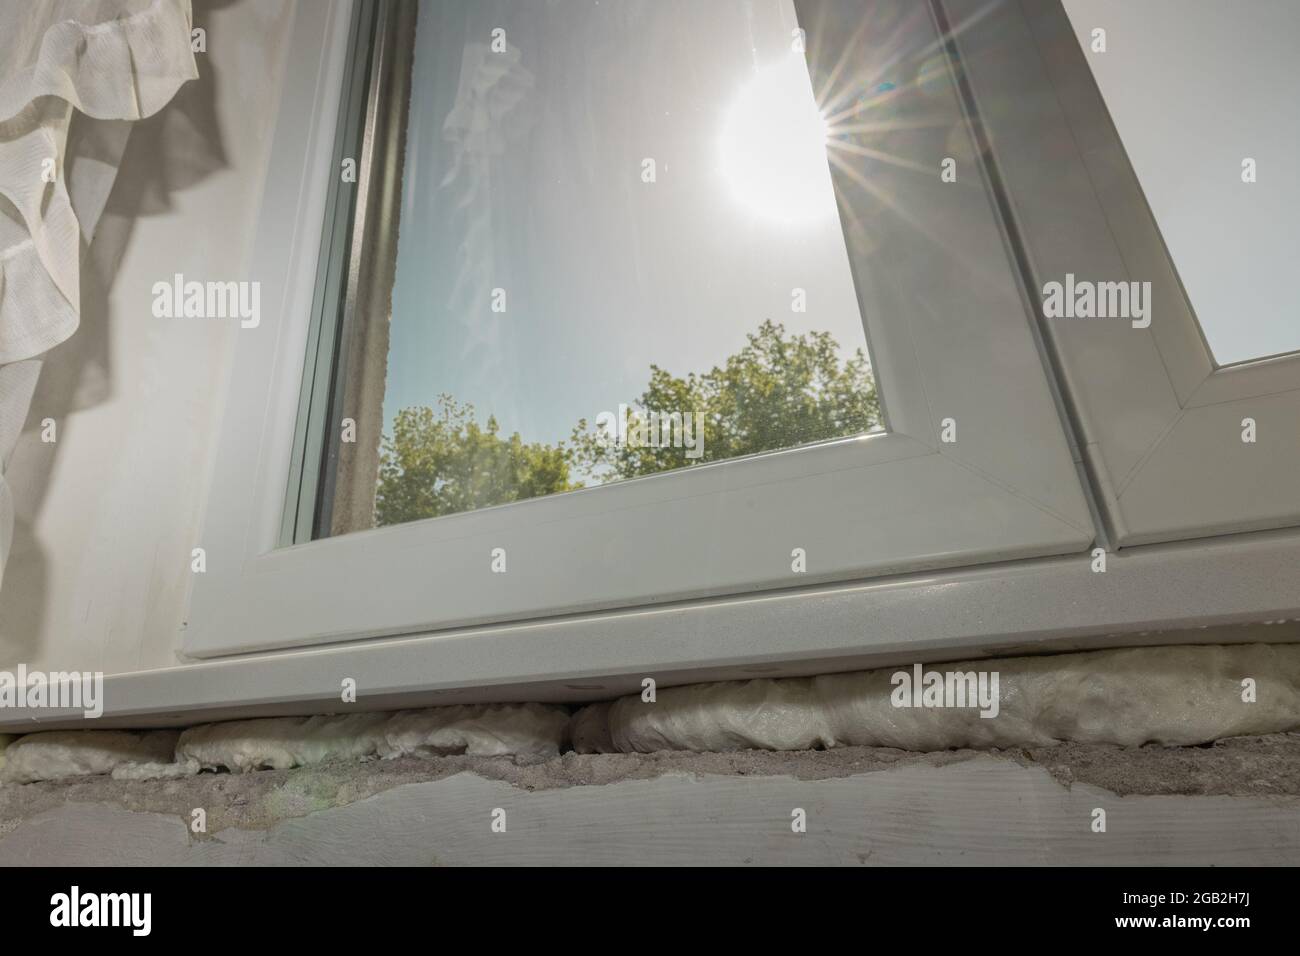 Construction PU foam in the window installed using a mounting installation  foam Stock Photo by ©photovs 311422434